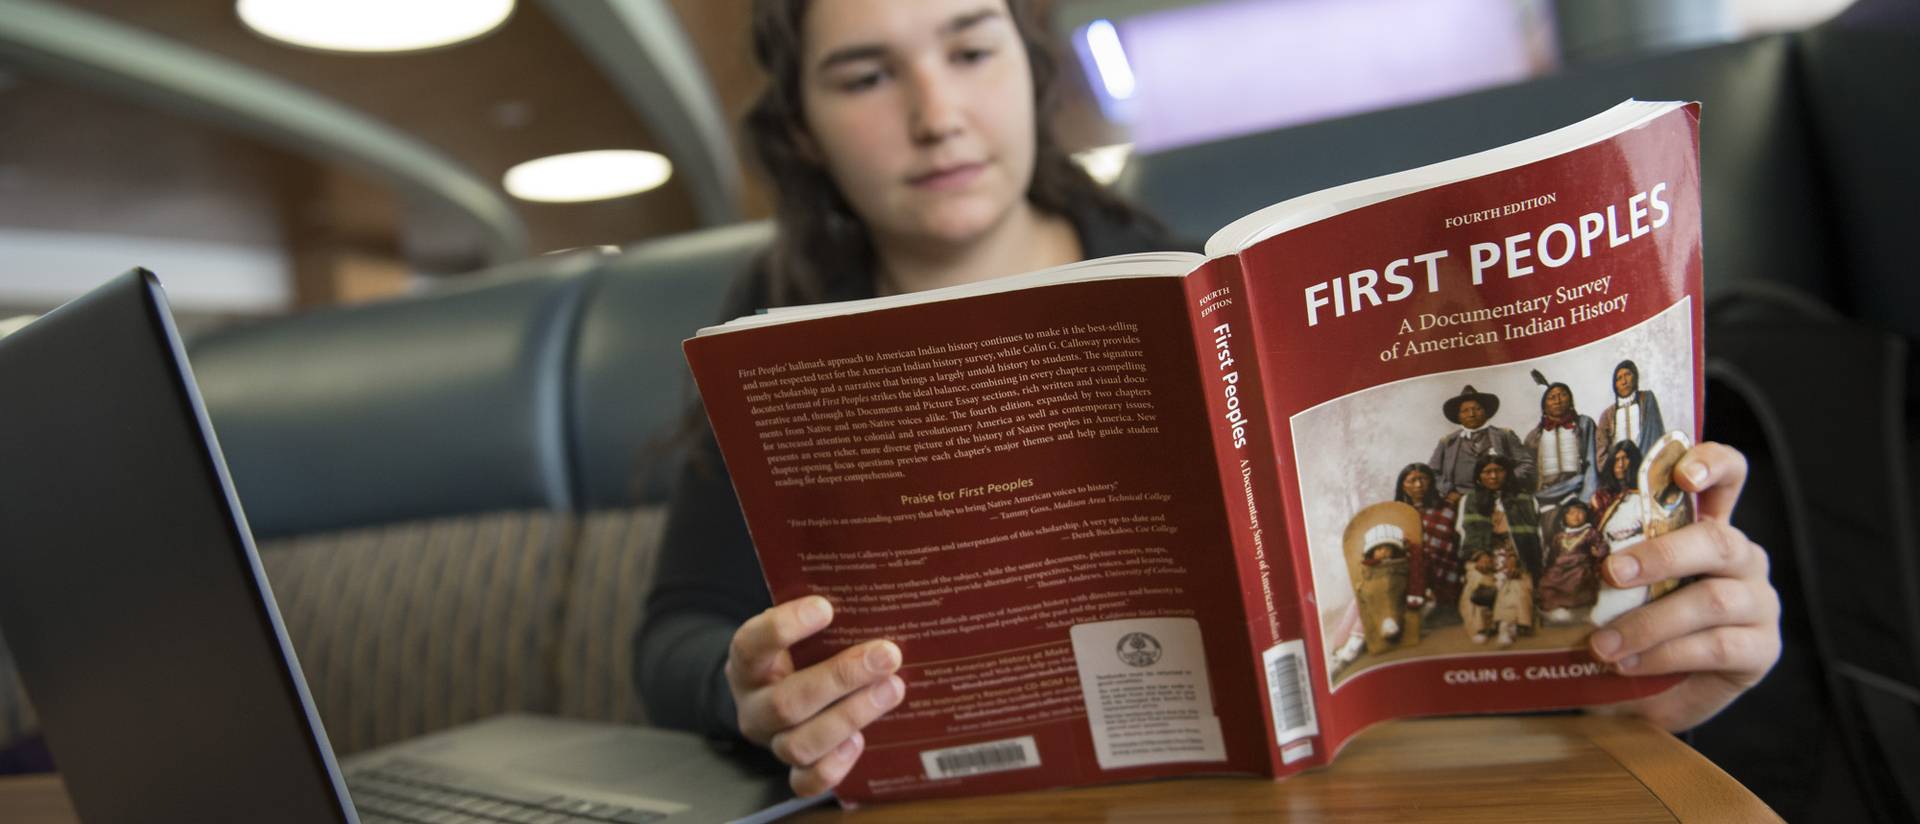 A student reads an American Indian Studies textbook in a Davies Center booth.